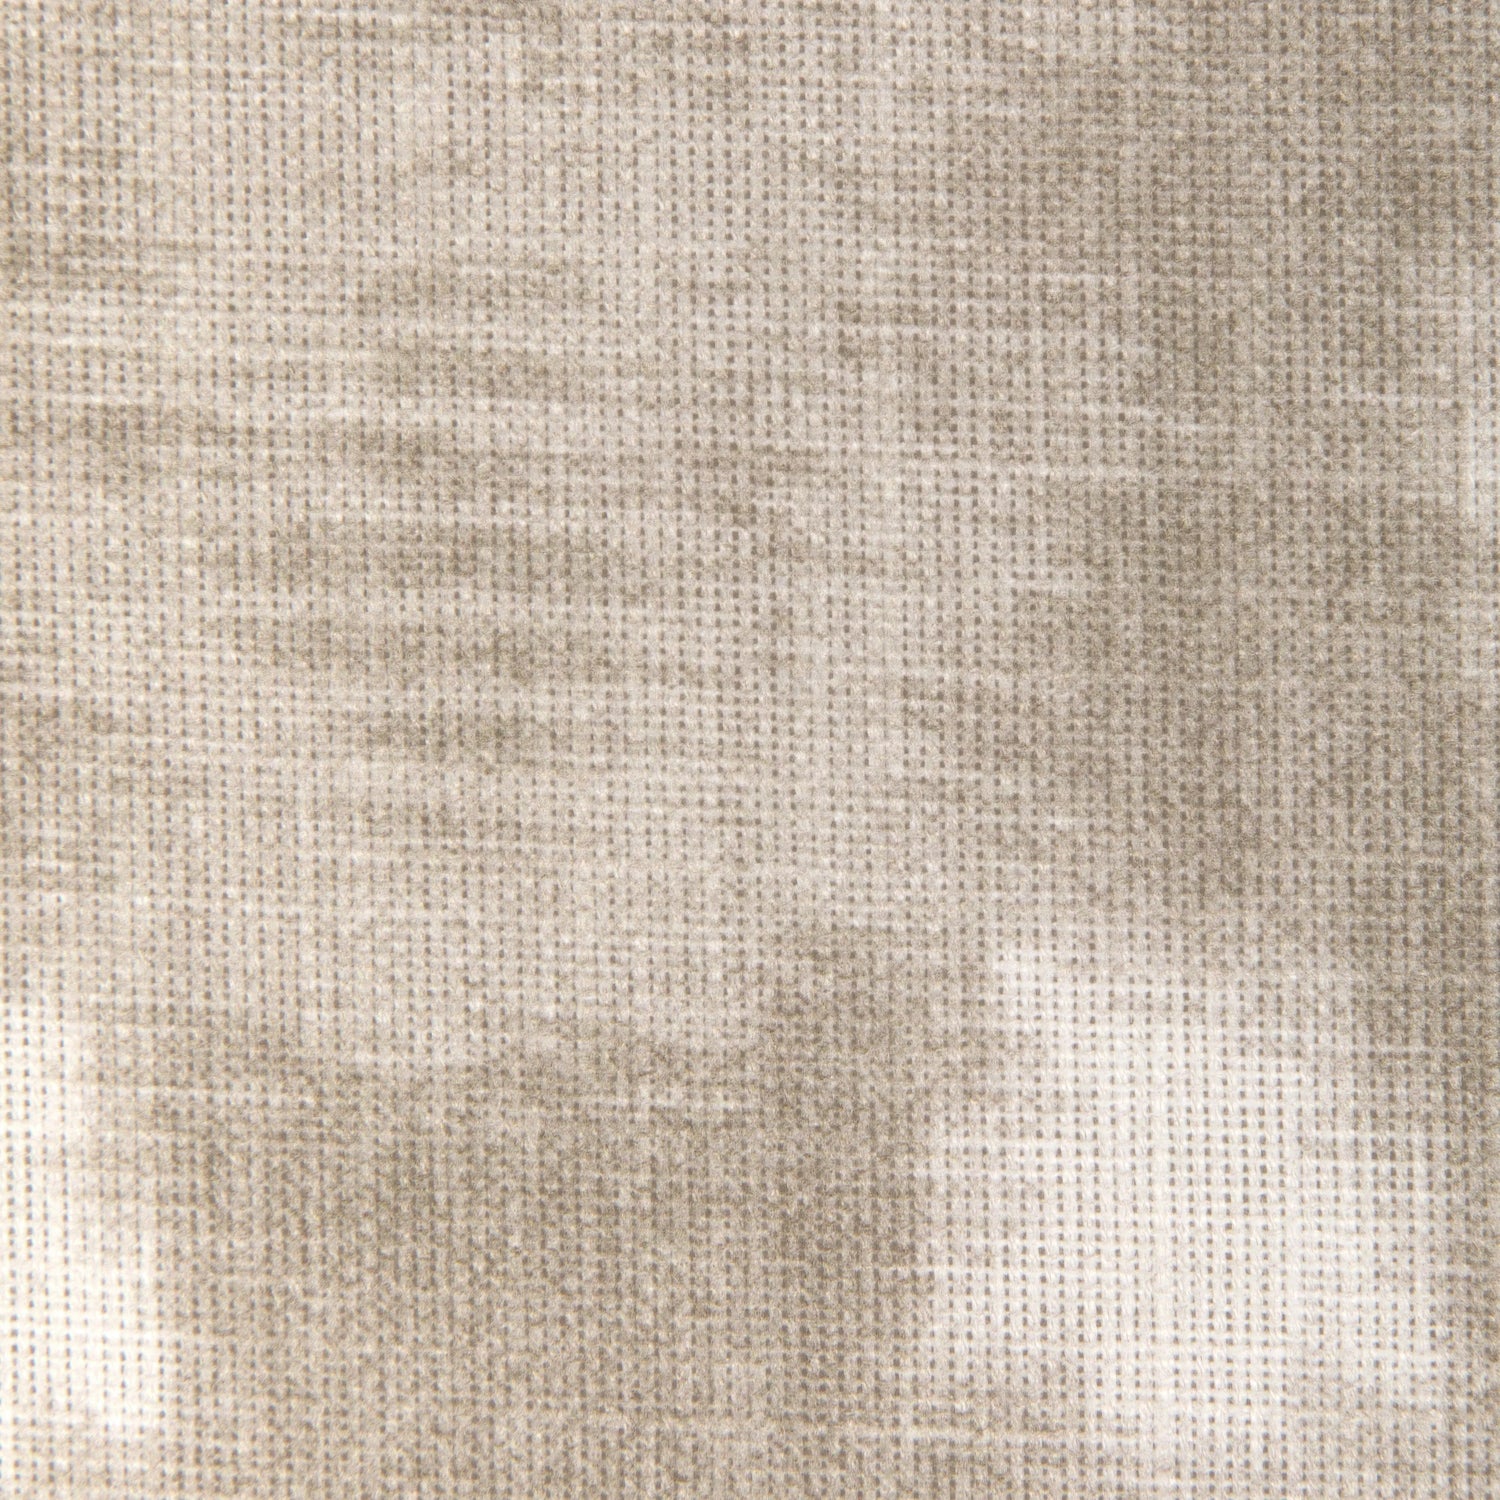 Closeup detail of Anjuna fabric in driftwood color - pattern ANJUNA.16.0 - by Kravet Couture in the Riviera collection